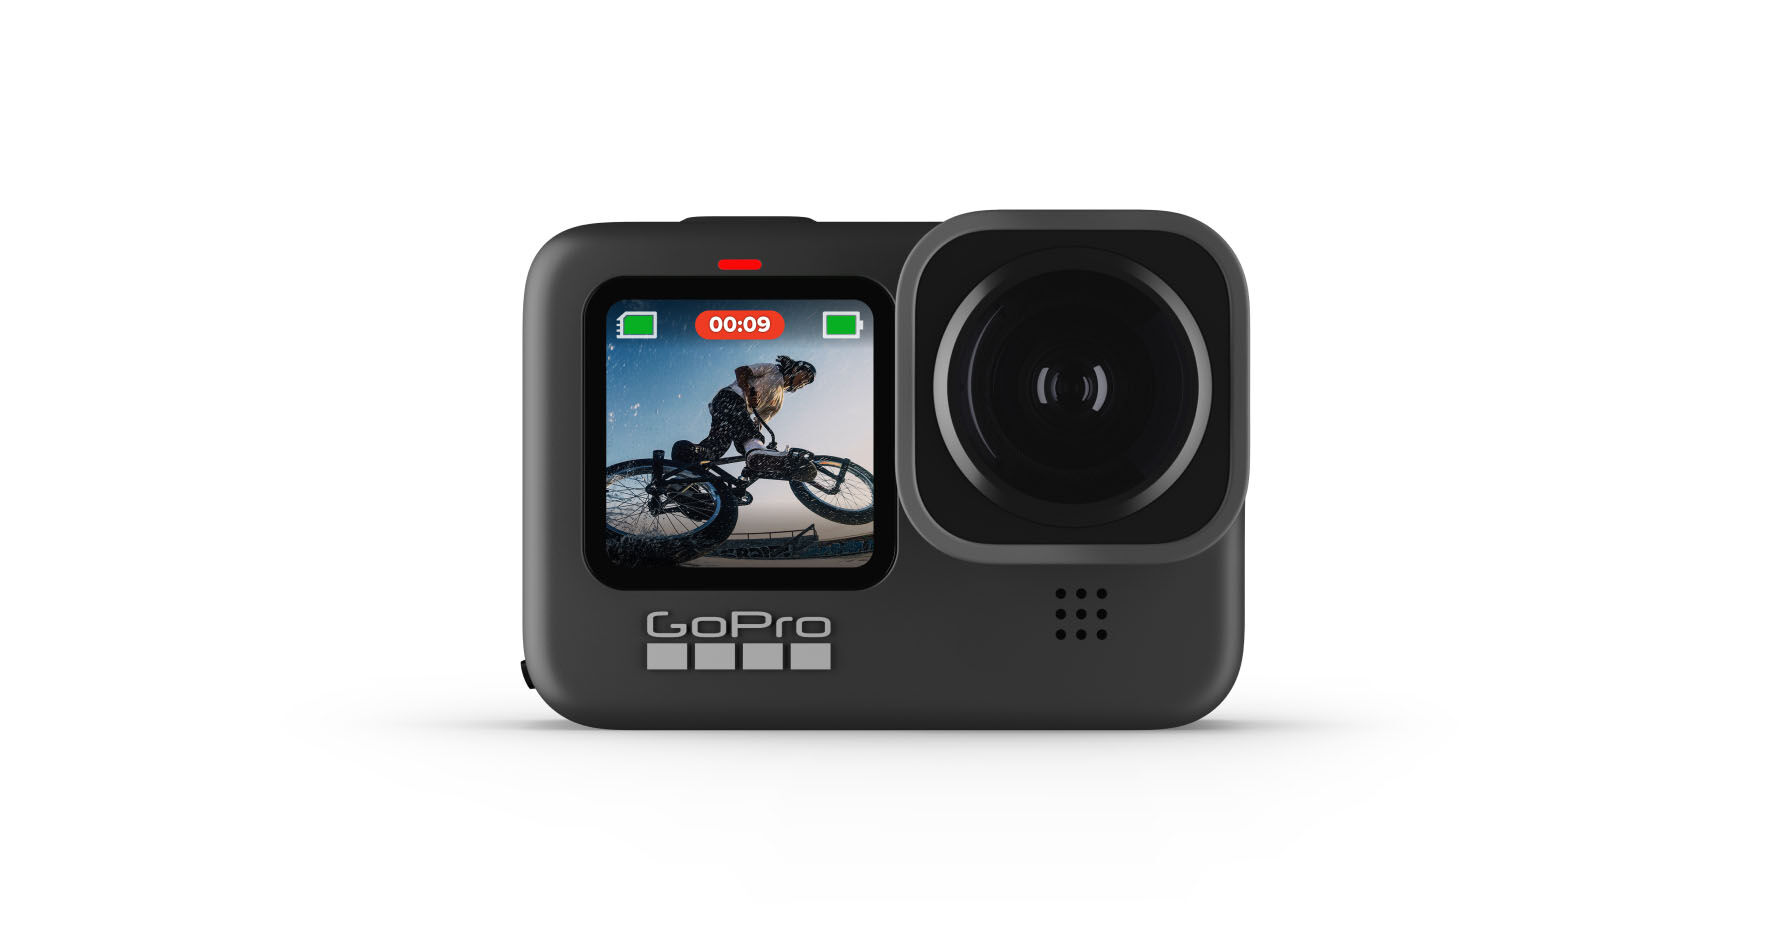 gopro max lens release date